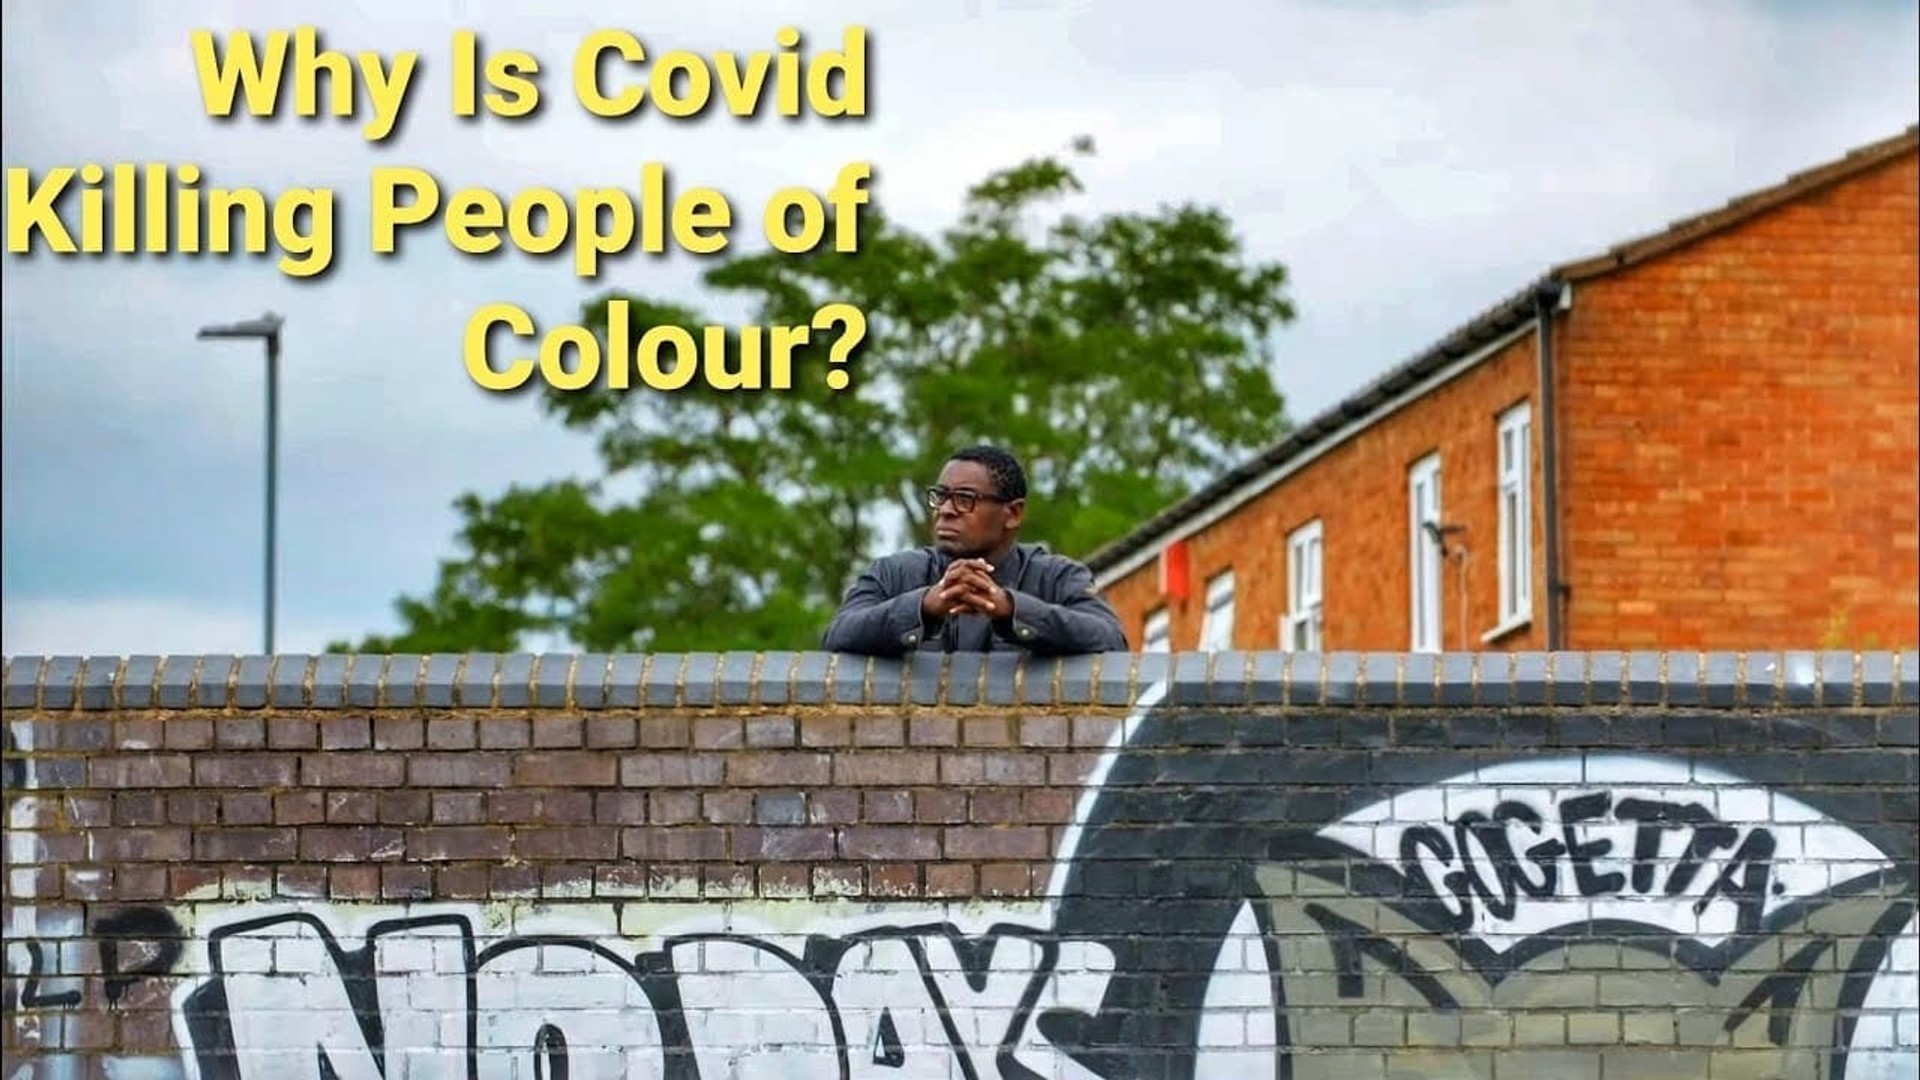 Why Is Covid Killing People of Colour? background